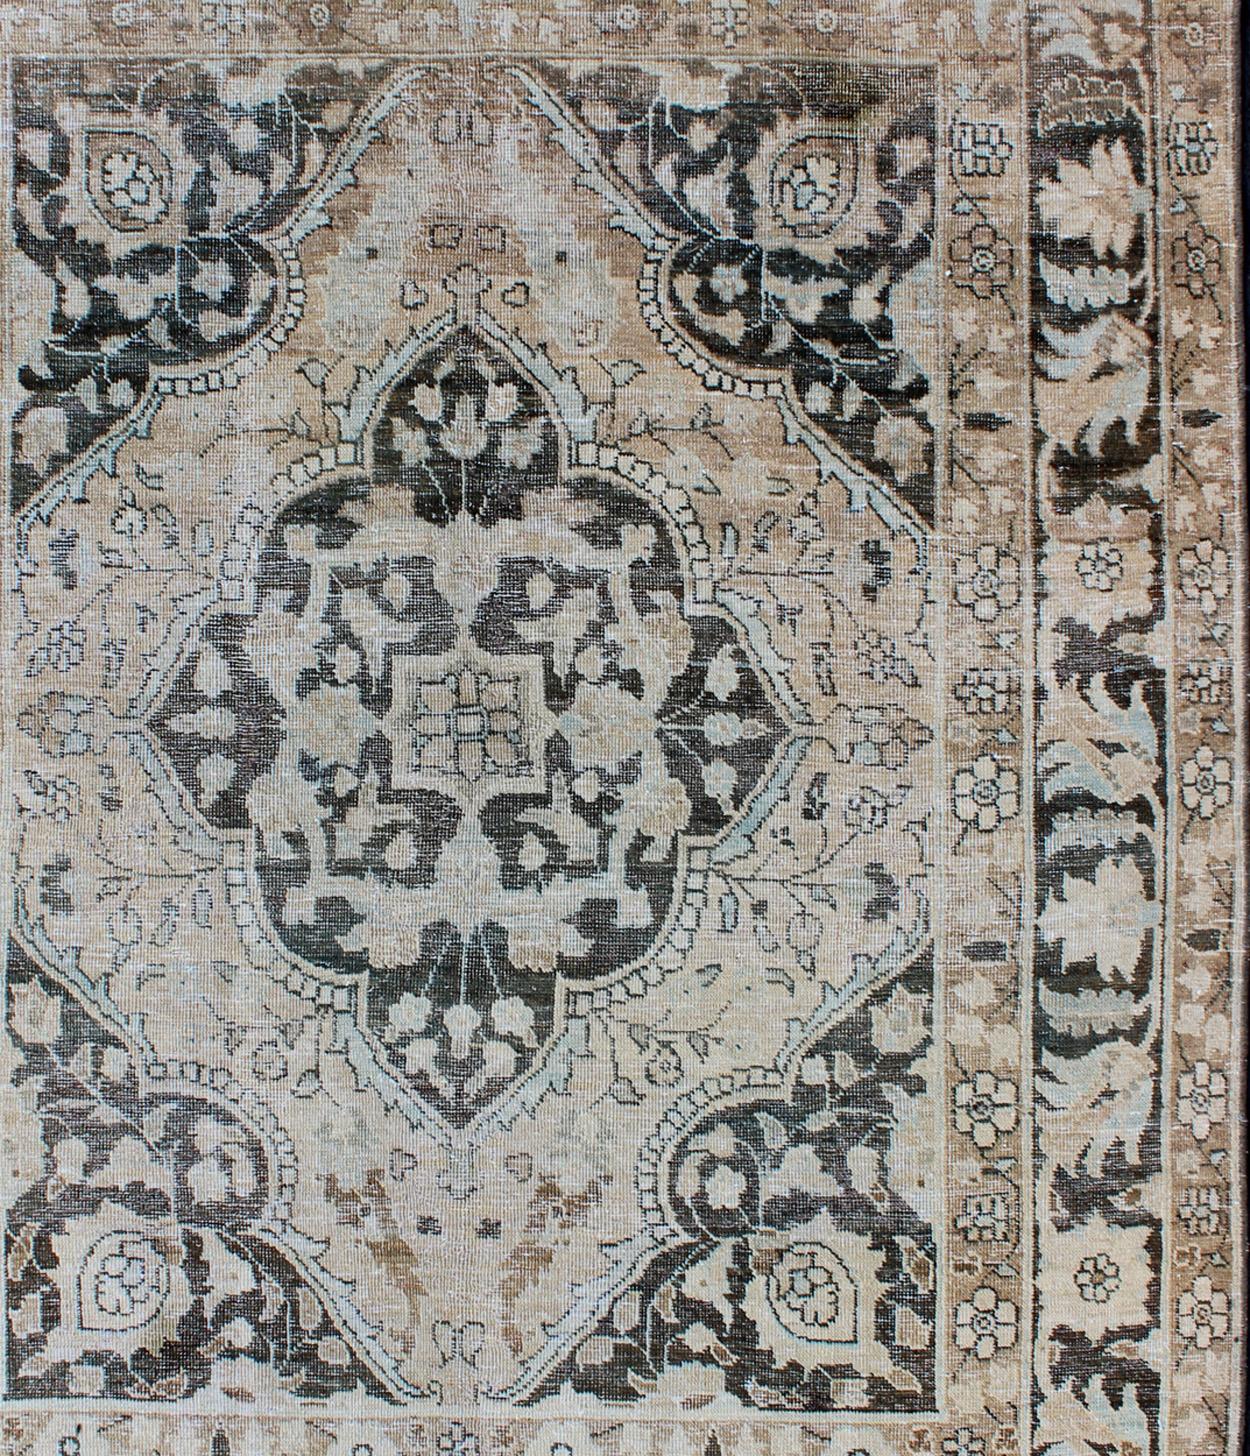   Antique Persian Tabriz Rug with Geometric Medallion Design in D. Charcoal, Light Honey, Light blue & Taupe. 

Measures: 4'6 x 6'

This wonderful antique Persian Tabriz with geometrics and flora  in dark gray medallion, cornices and border Keivan